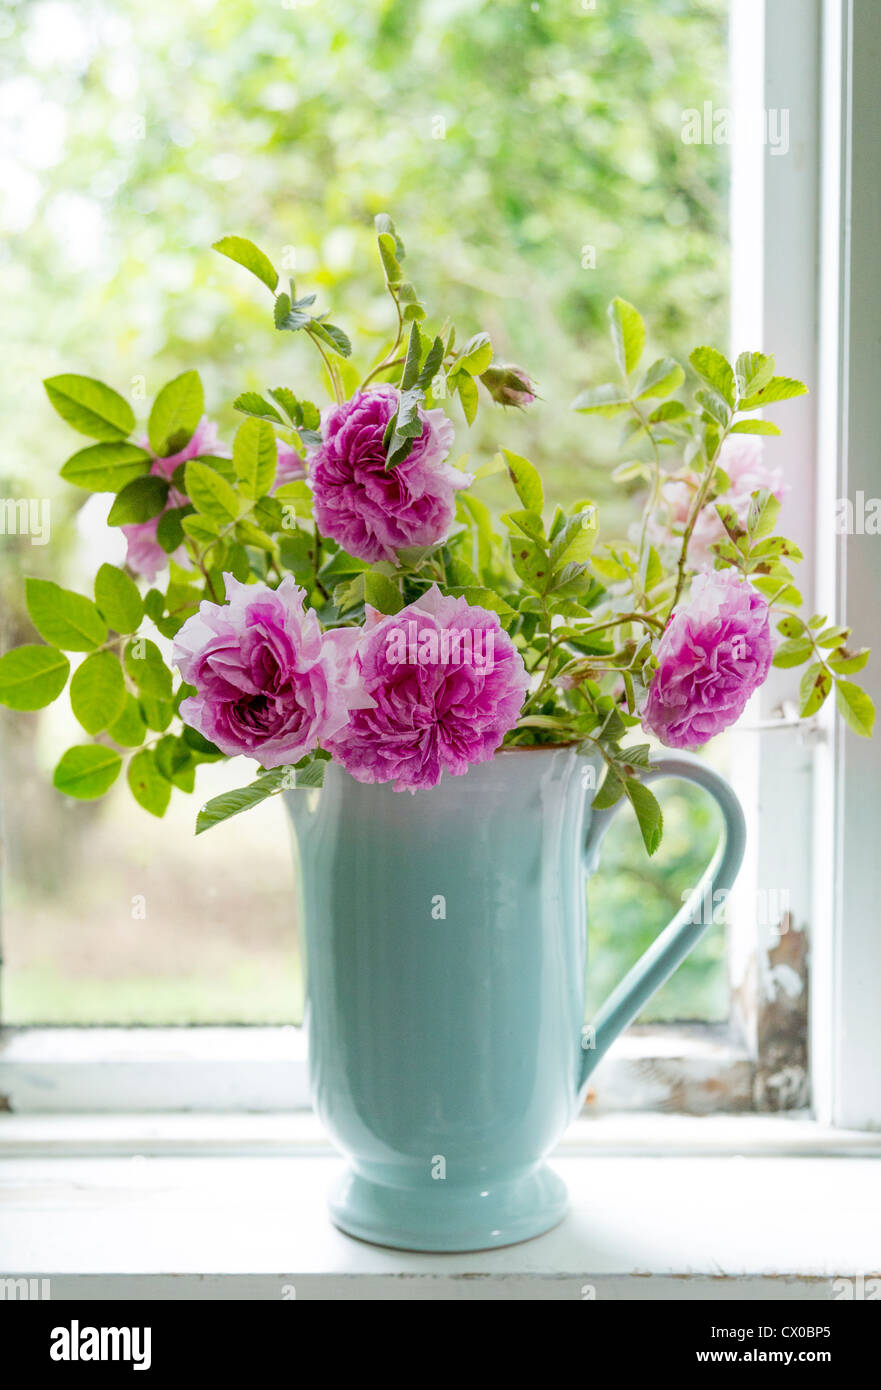 Pink garden roses in a blue jug / vase in the window sill of a rustic cottage Stock Photo